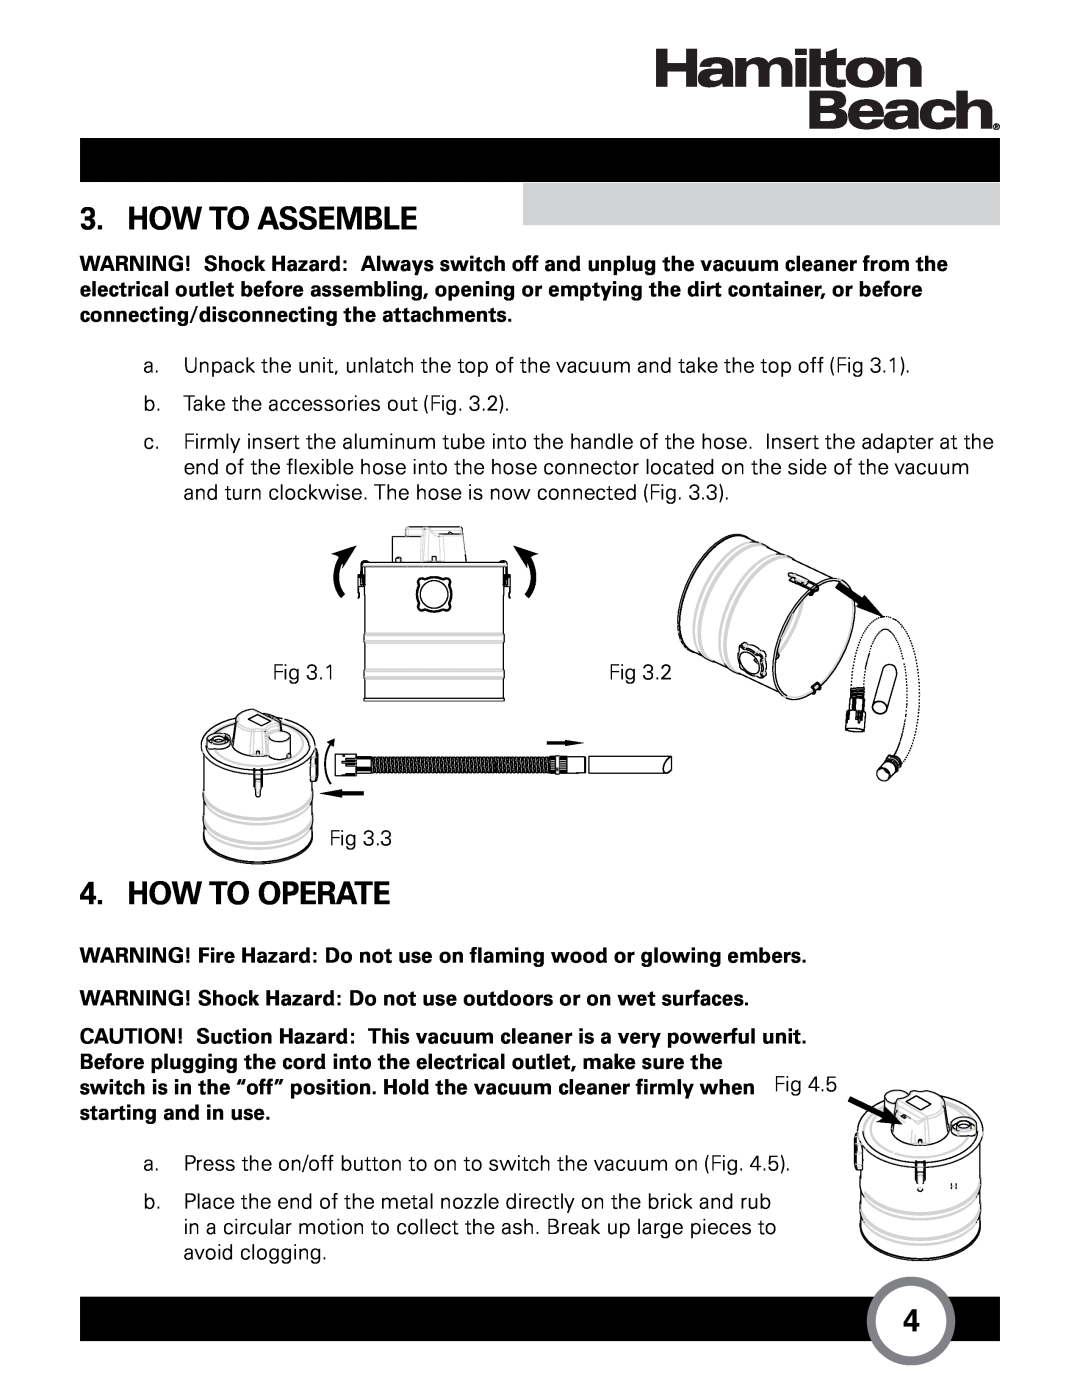 Hamilton Beach HB-405 owner manual How To Assemble, How To Operate 